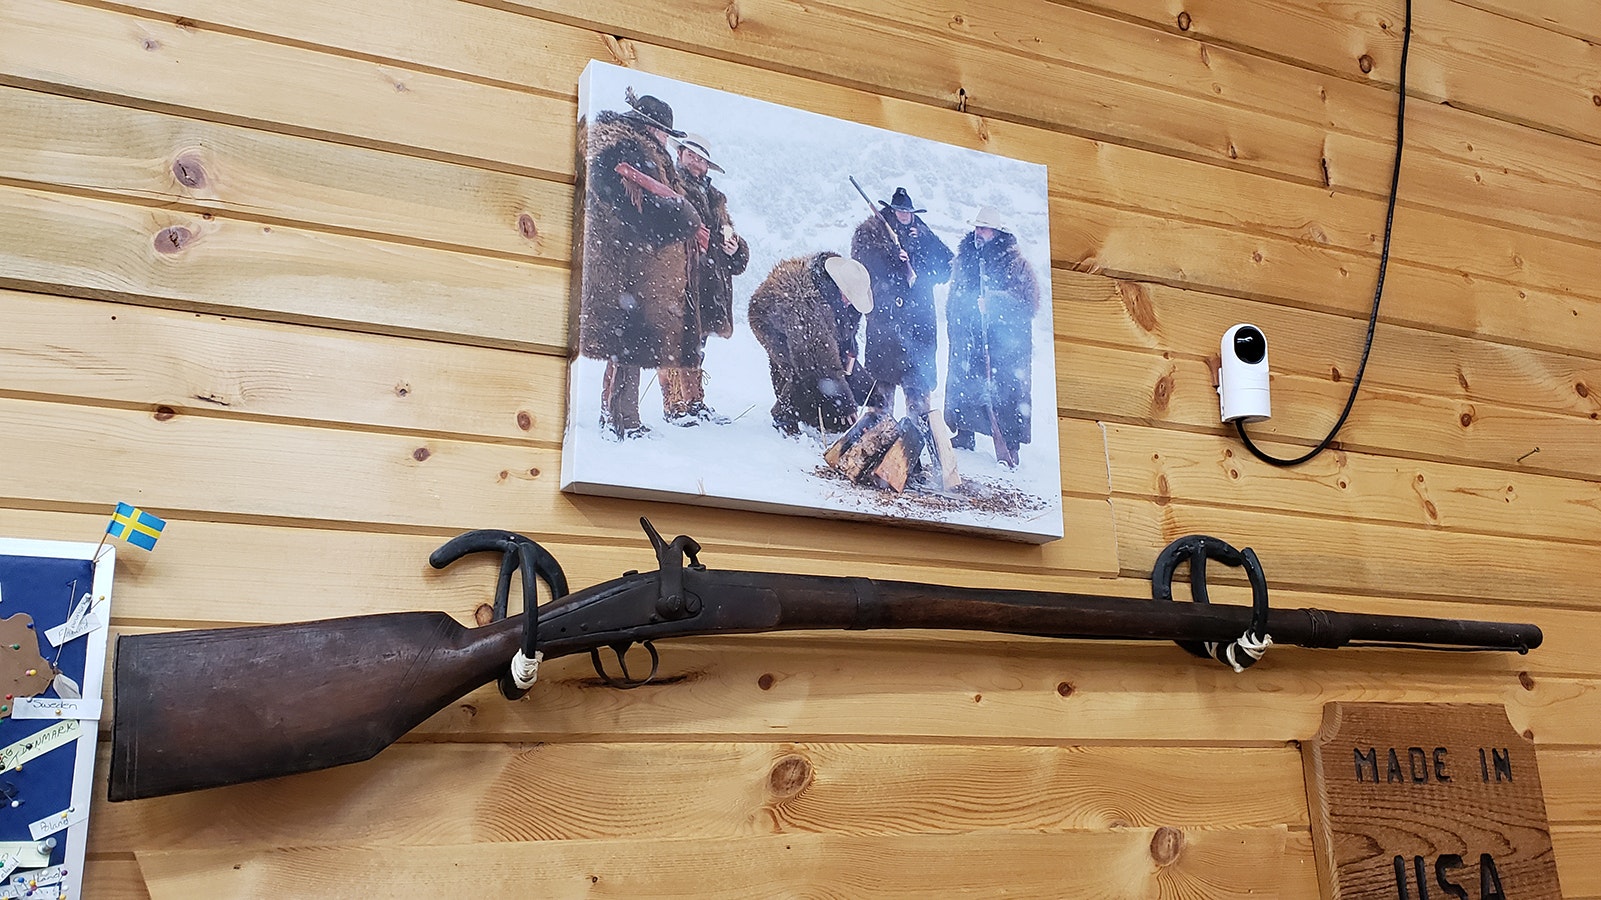 A photo of "The Hateful Eight" hangs on the wall of Merlin's Hide Out above an antique rifle found at an auction.